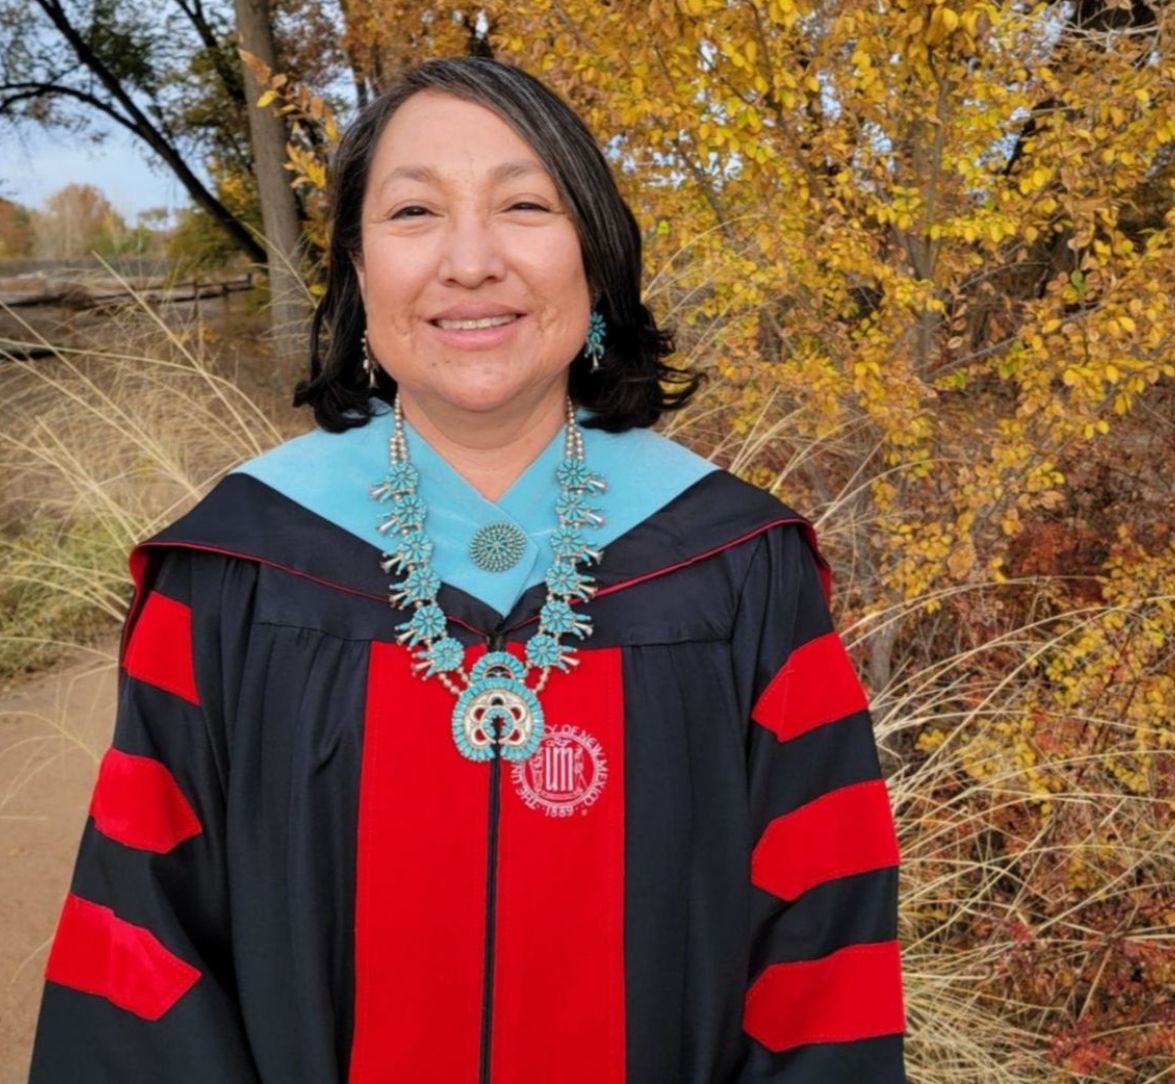  Native Americans and Higher Education: A Conversation with Dr. Jodi Burshia